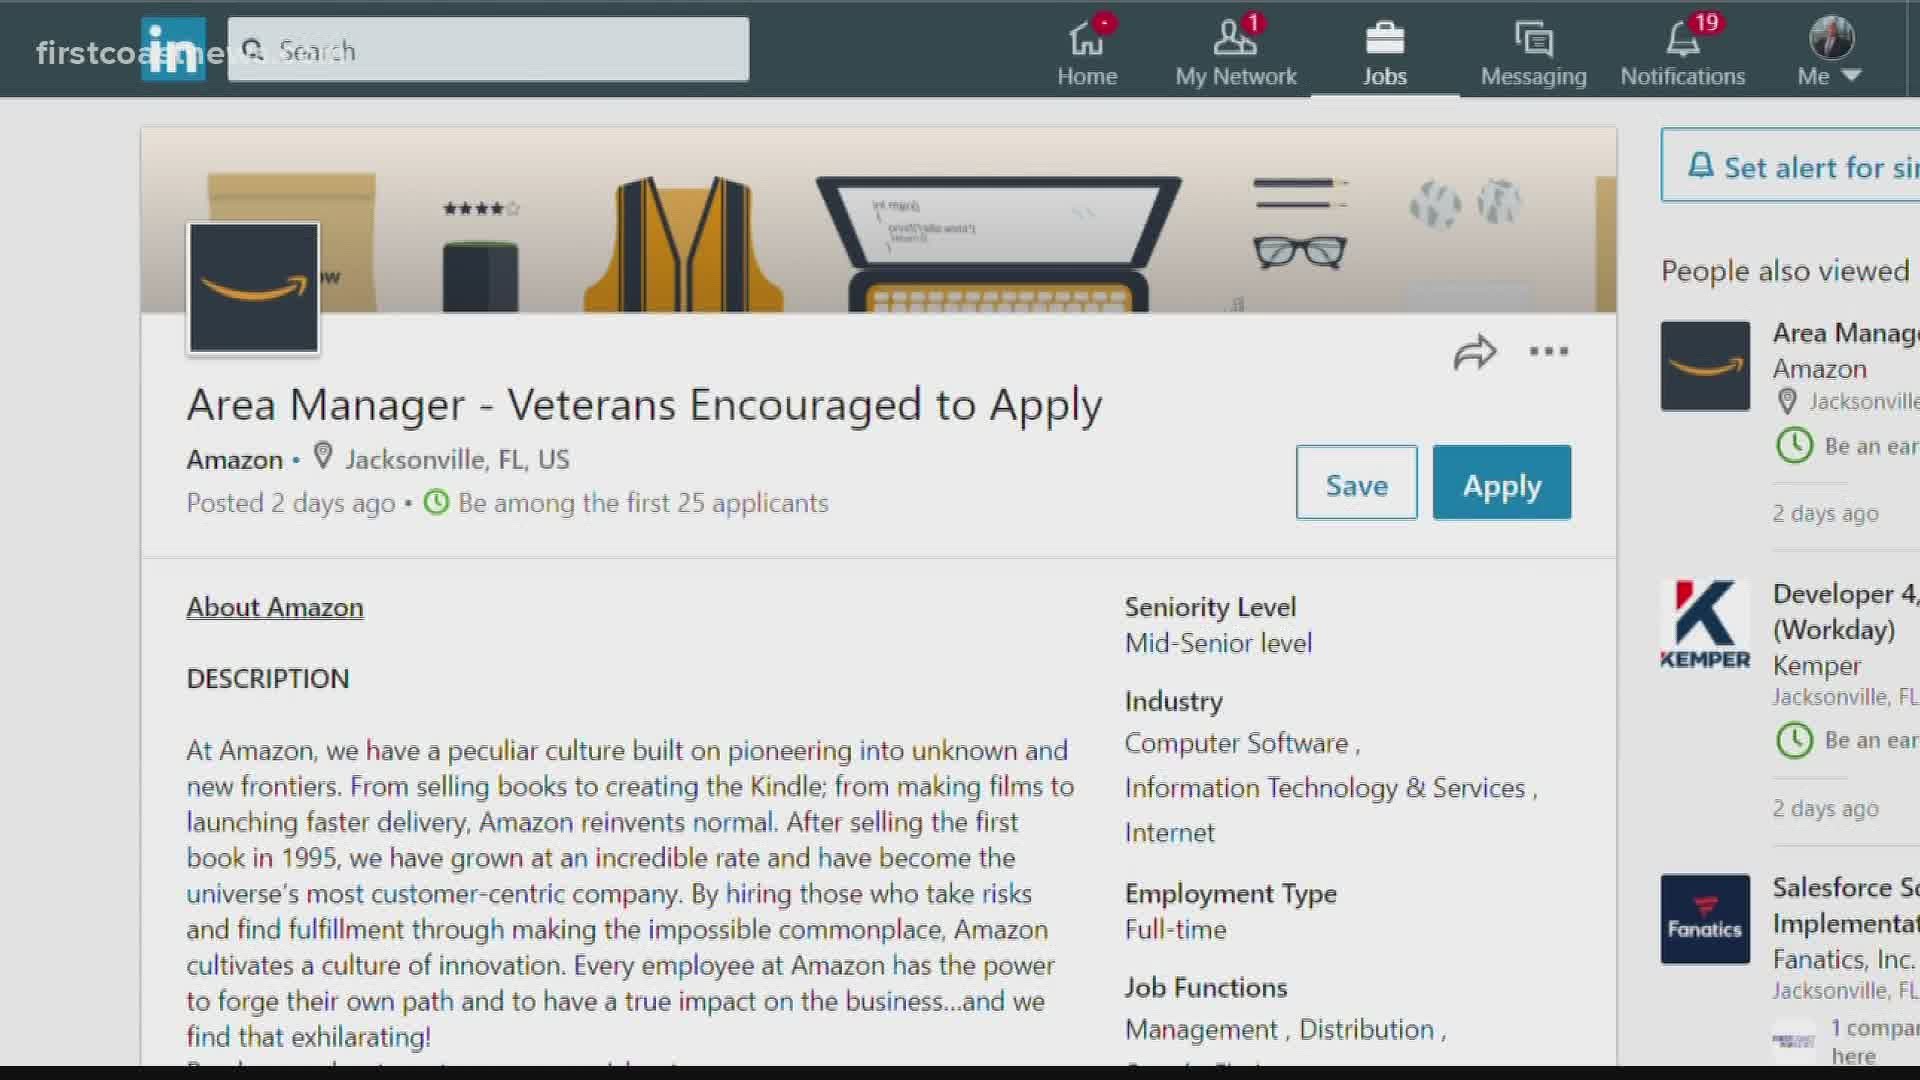 UPS Freight is hiring people to work as part-time dockworkers, the listing says it is a physical position that involves moving freight into and out of trailers.